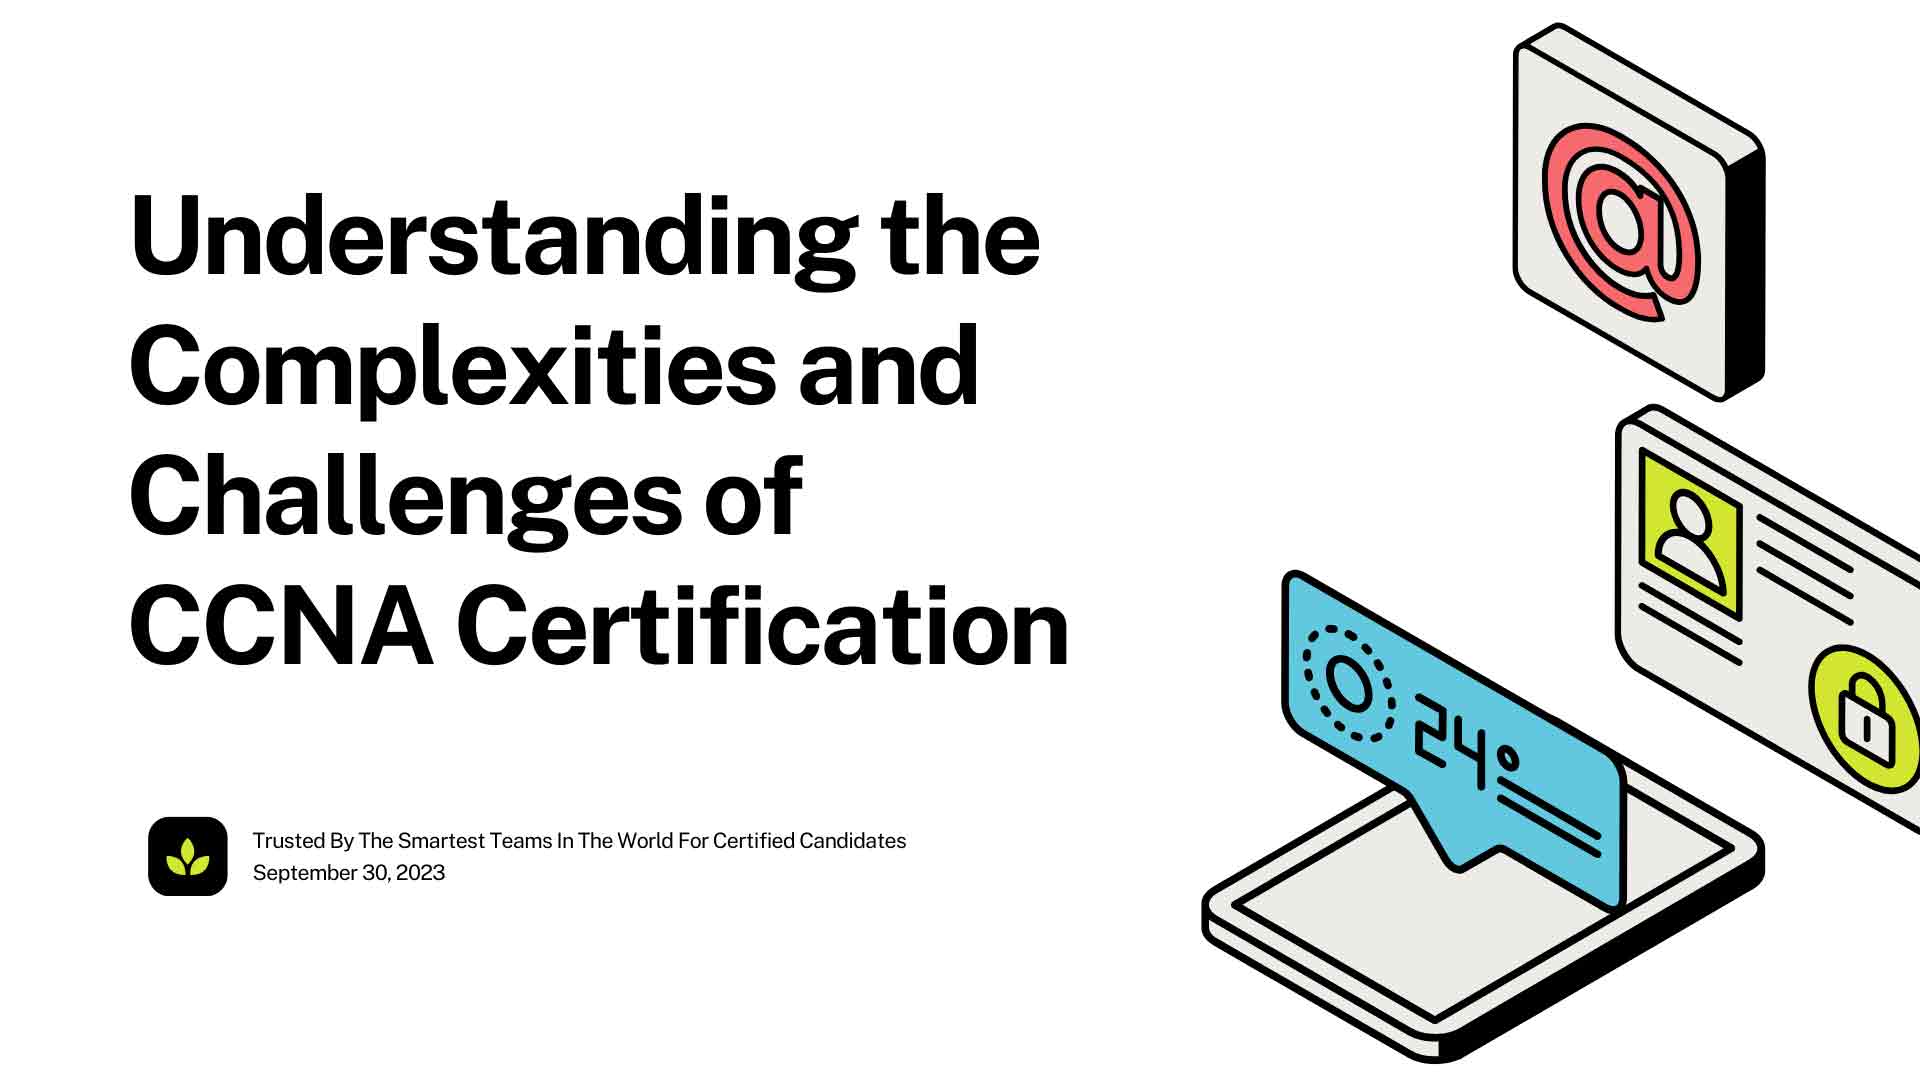 Understanding the Complexities and Challenges of CCNA Certification